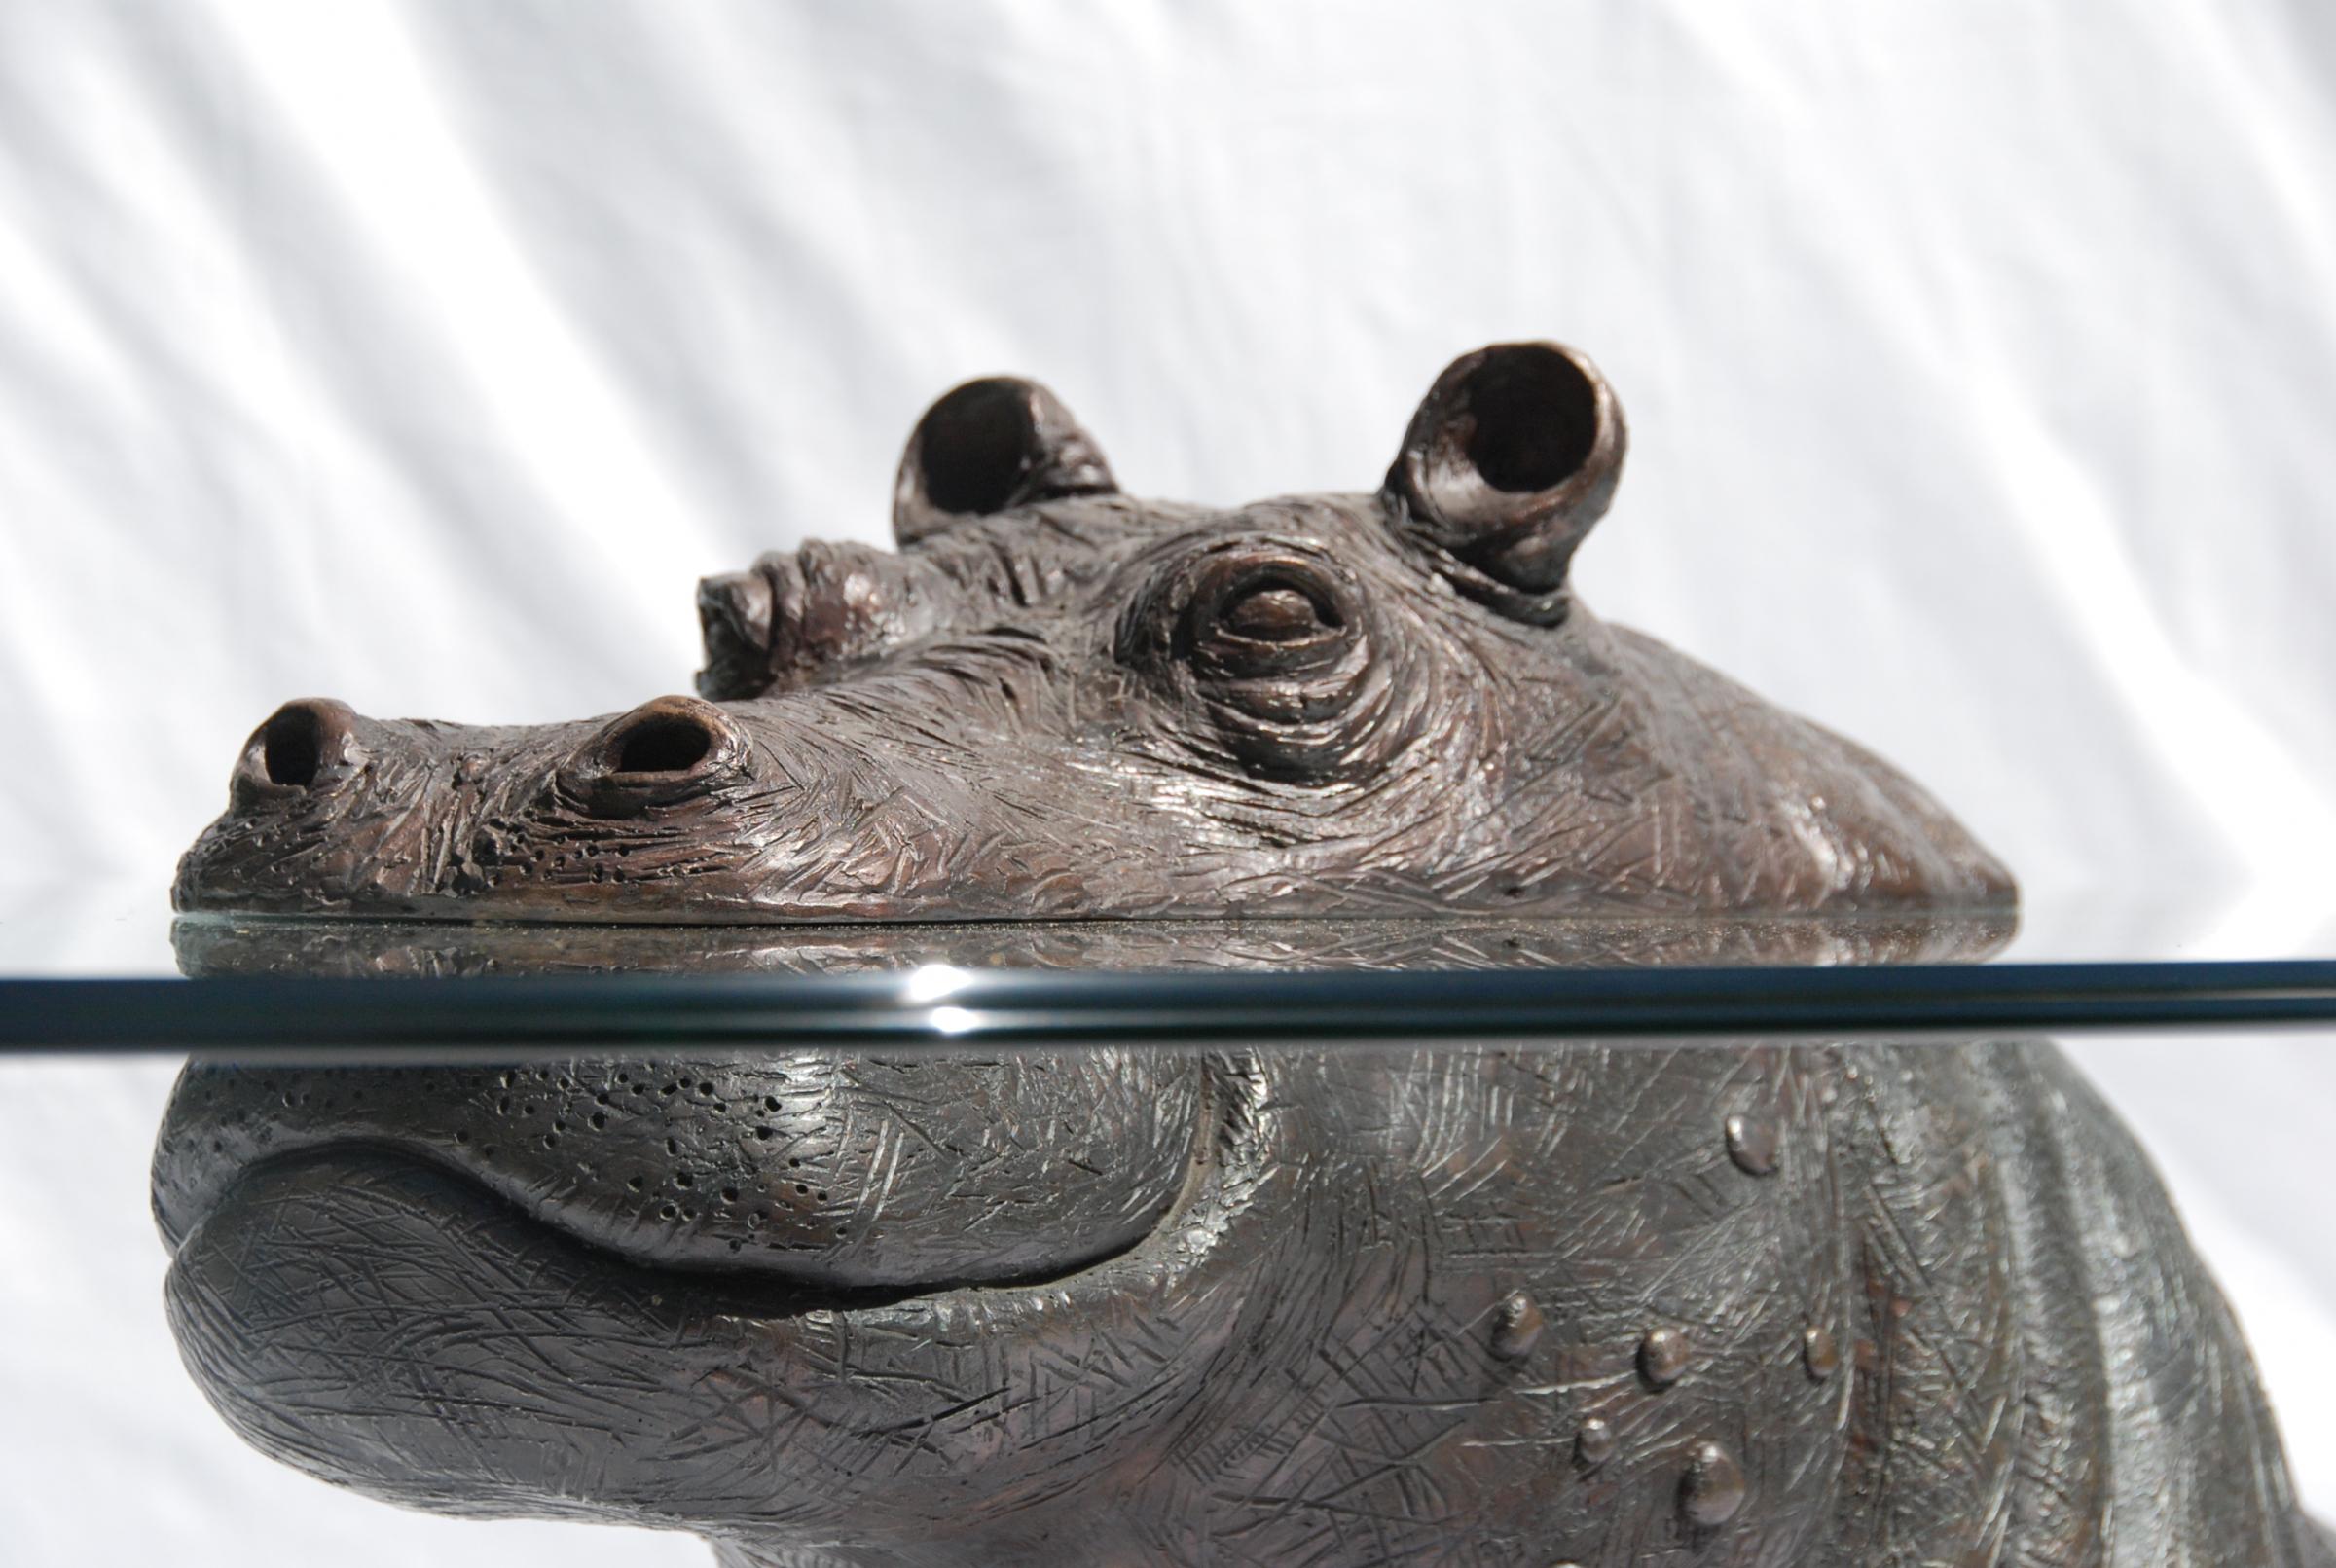 Hippo coffee table by Mark Stoddart